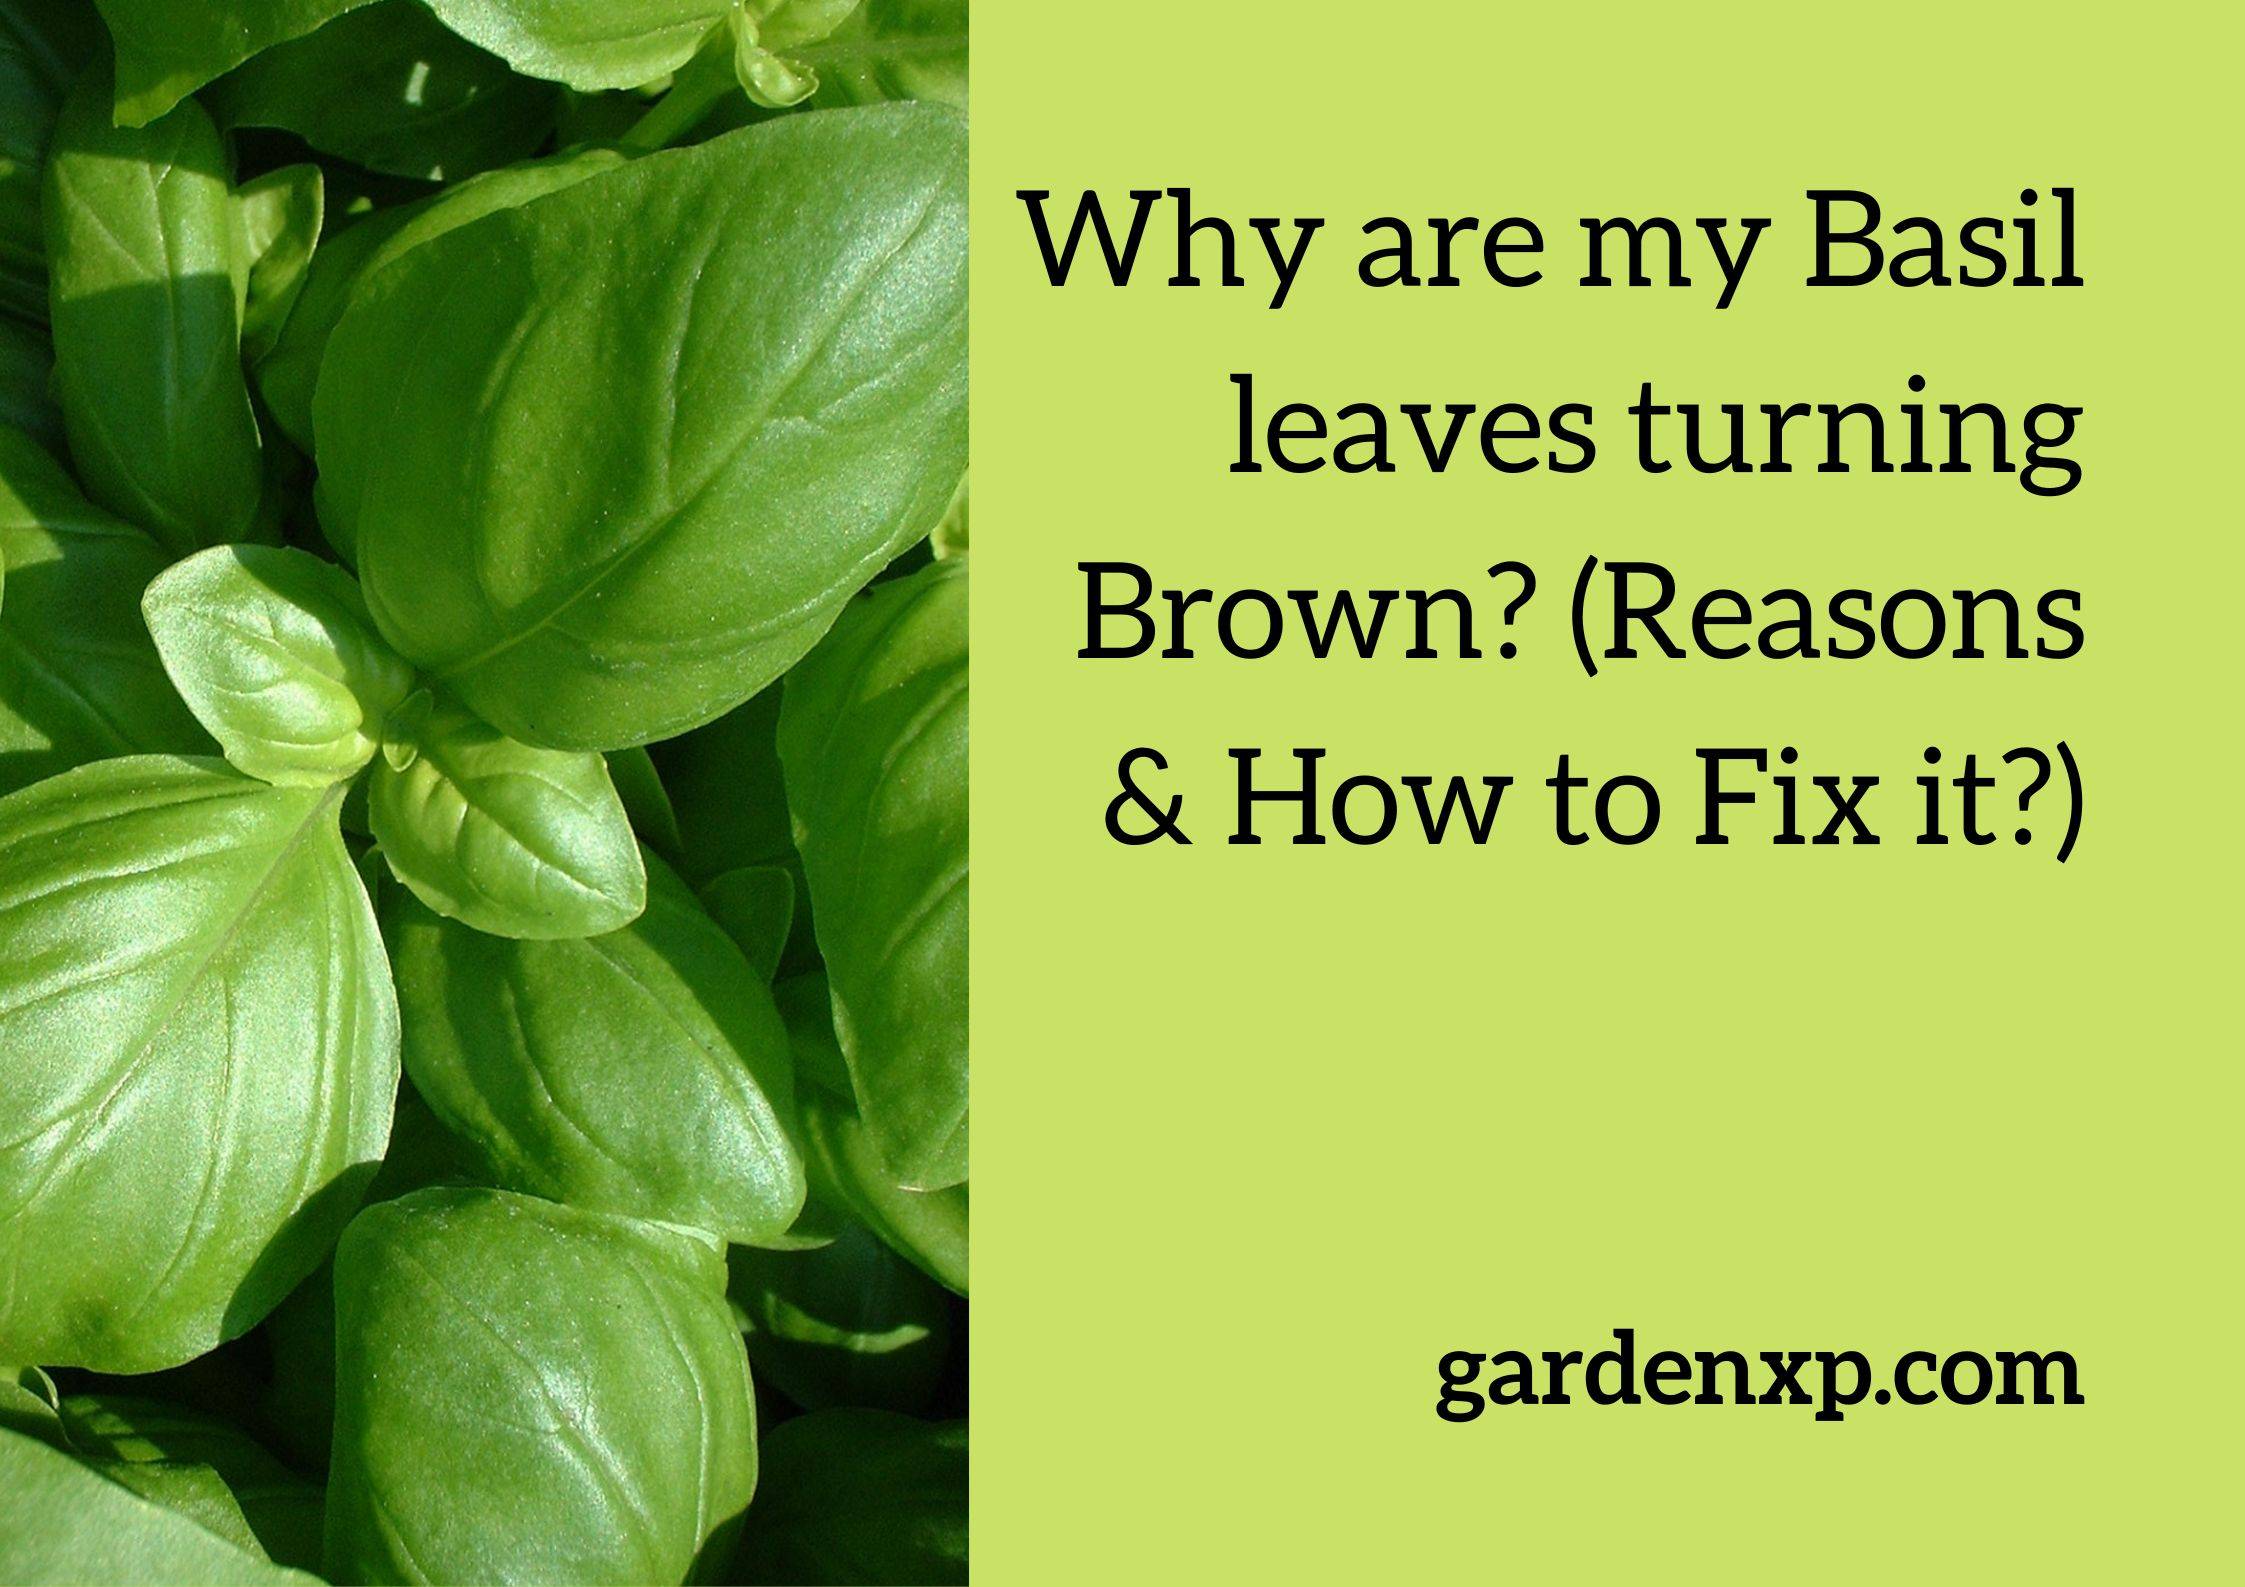 Why are my Basil leaves turning Brown? (Reasons & How to Fix it?)